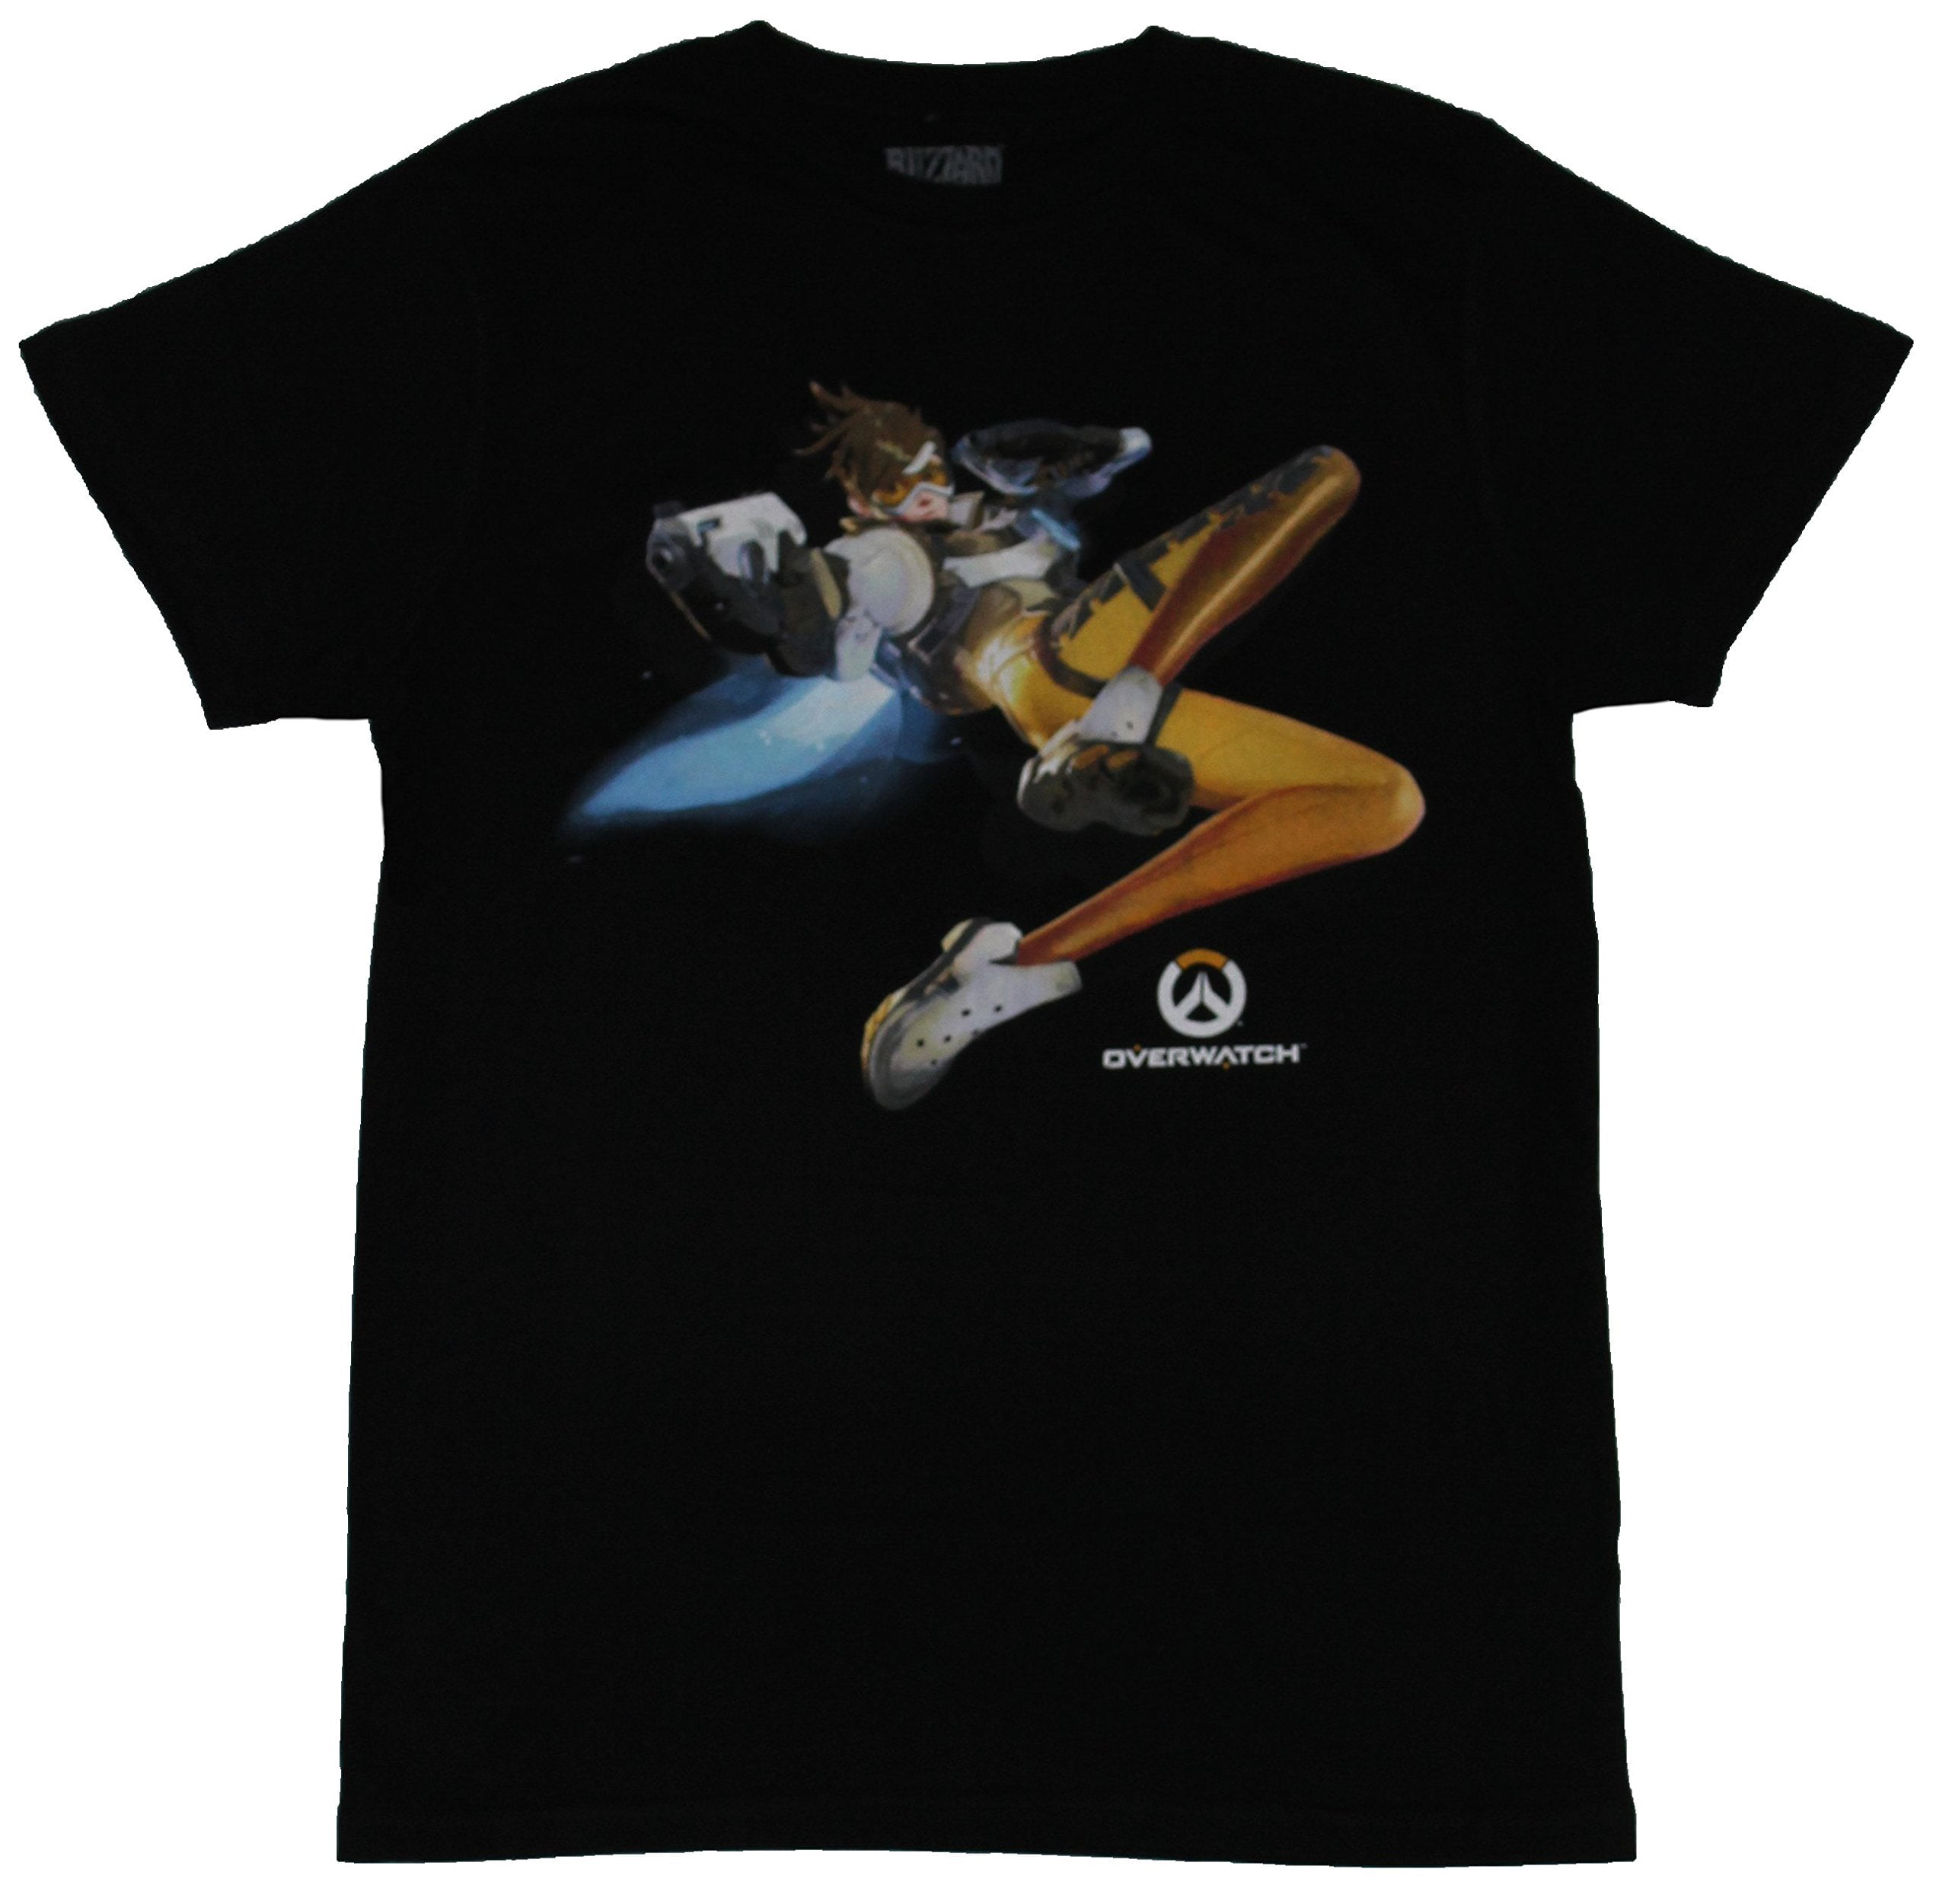 Overwatch Mens T-Shirt - The Cavaly's Here Diving Tracer Image (Medium)